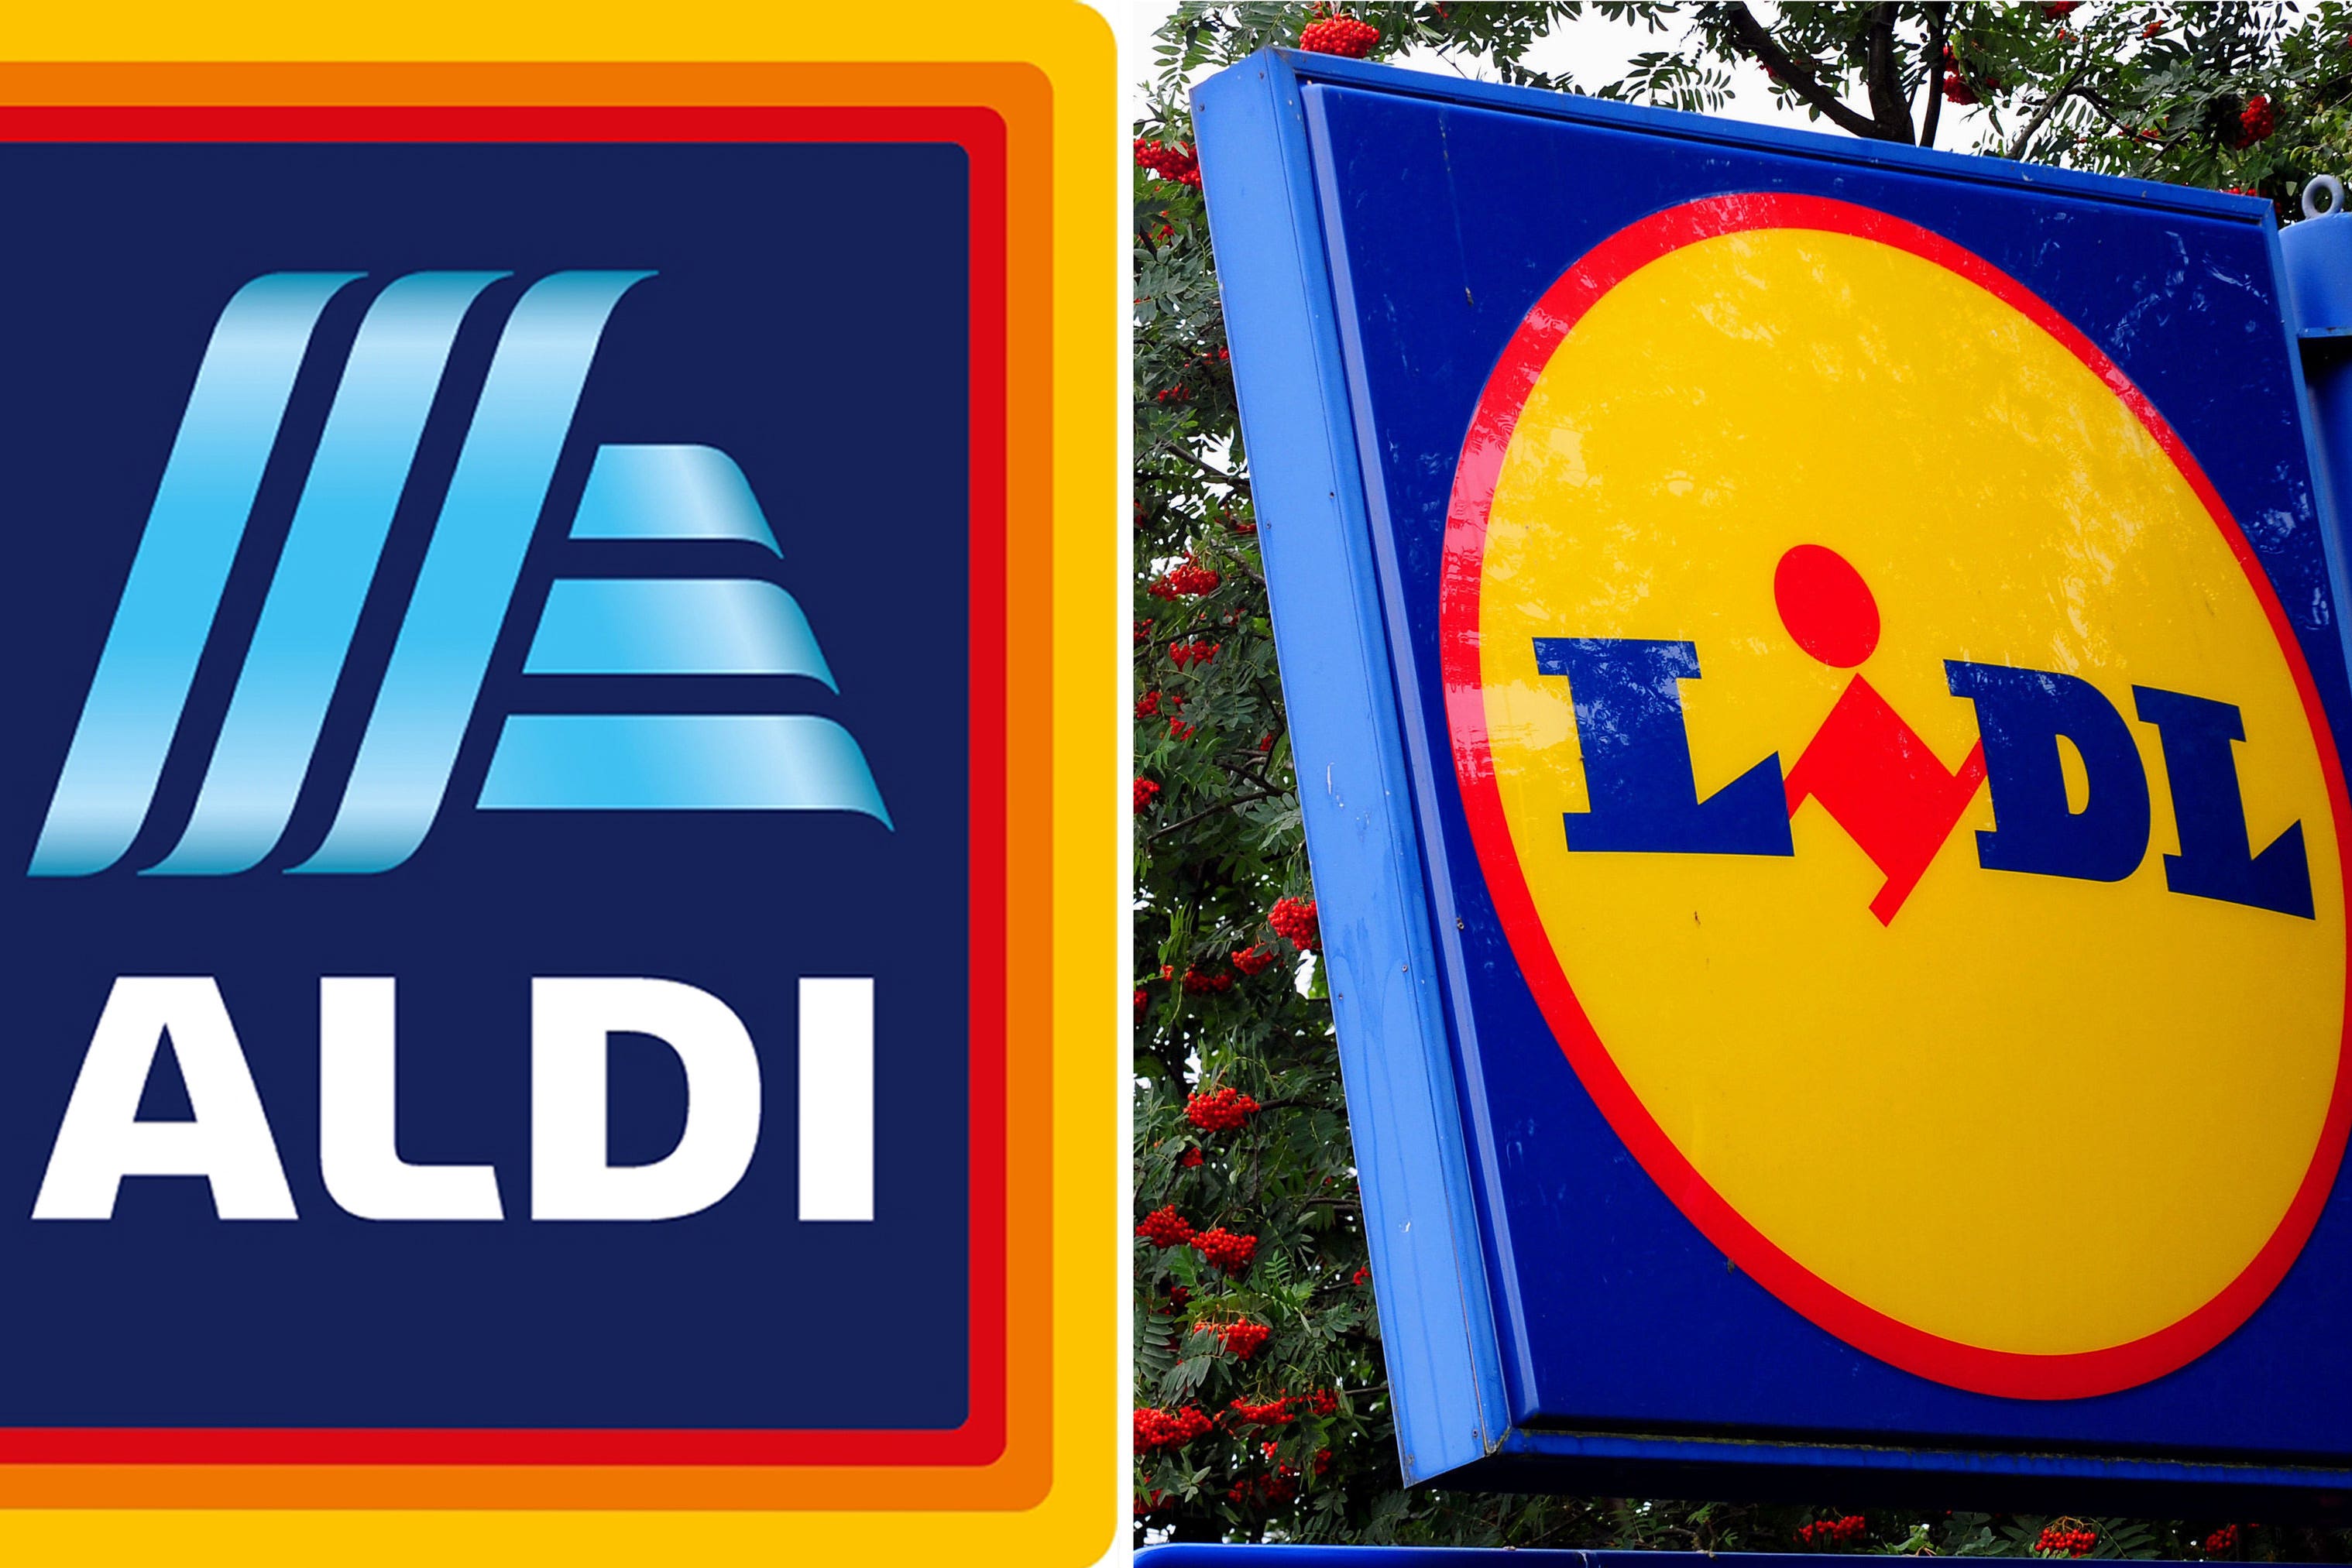 December’s results show a basket of 43 groceries was £74.83 at Aldi, narrowly cheaper than at Lidl where it cost £76.74